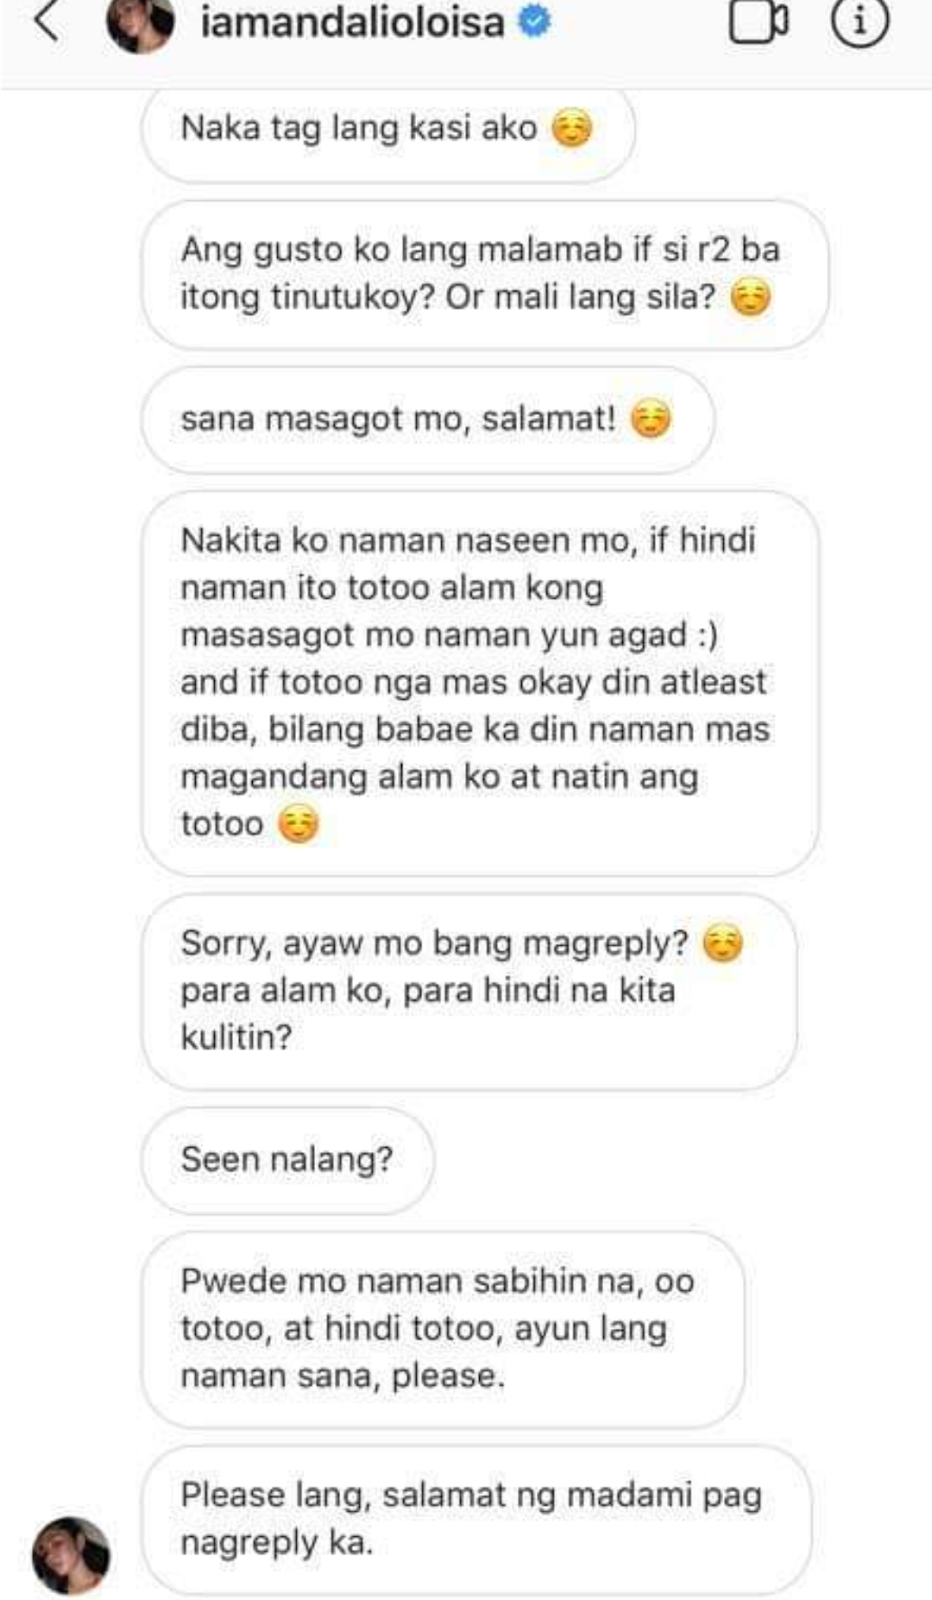 Ronnie Alonte's rumored ex-GF exposes private messages she received from Loisa Andalio